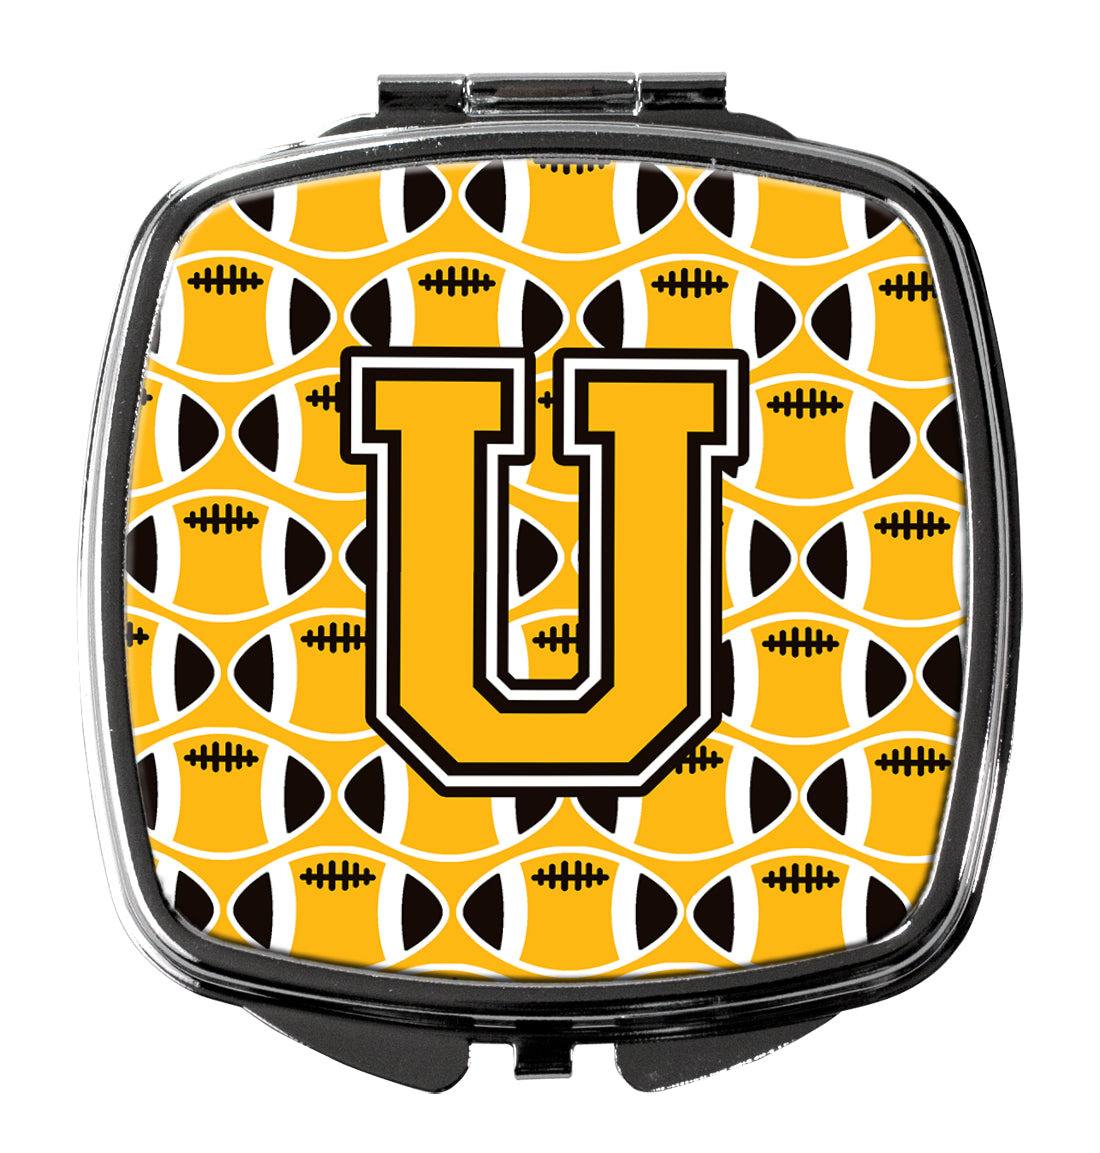 Letter U Football Black, Old Gold and White Compact Mirror CJ1080-USCM  the-store.com.